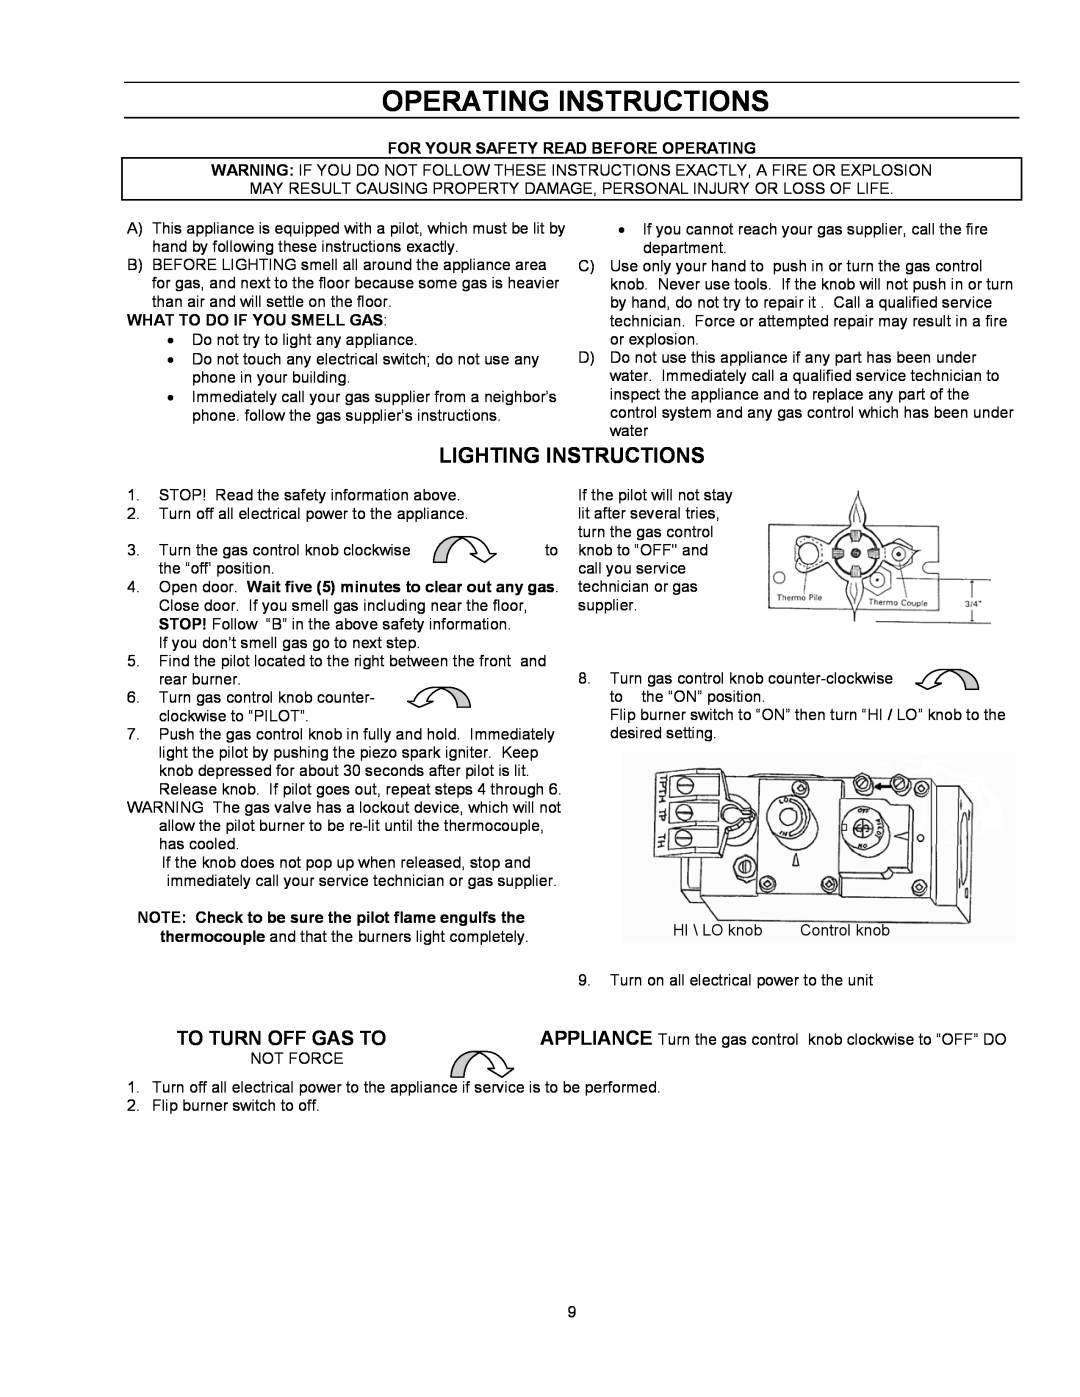 Enviro EG 28 B owner manual Operating Instructions, Lighting Instructions, To Turn Off Gas To 